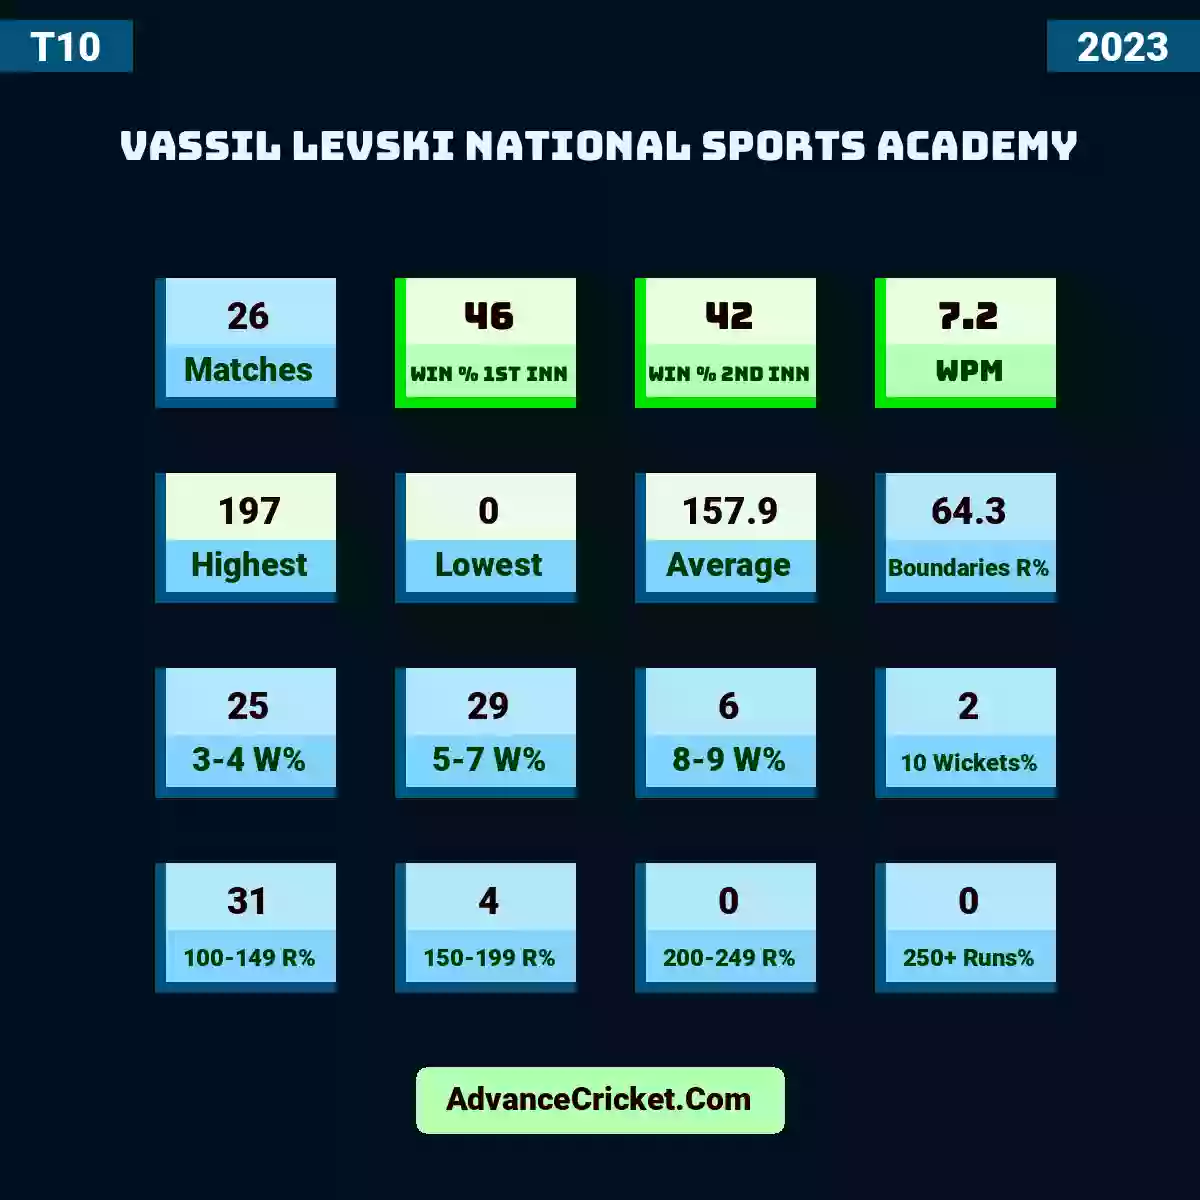 Image showing Vassil Levski National Sports Academy with Matches: 26, Win % 1st Inn: 46, Win % 2nd Inn: 42, WPM: 7.2, Highest: 197, Lowest: 0, Average: 157.9, Boundaries R%: 64.3, 3-4 W%: 25, 5-7 W%: 29, 8-9 W%: 6, 10 Wickets%: 2, 100-149 R%: 31, 150-199 R%: 4, 200-249 R%: 0, 250+ Runs%: 0.